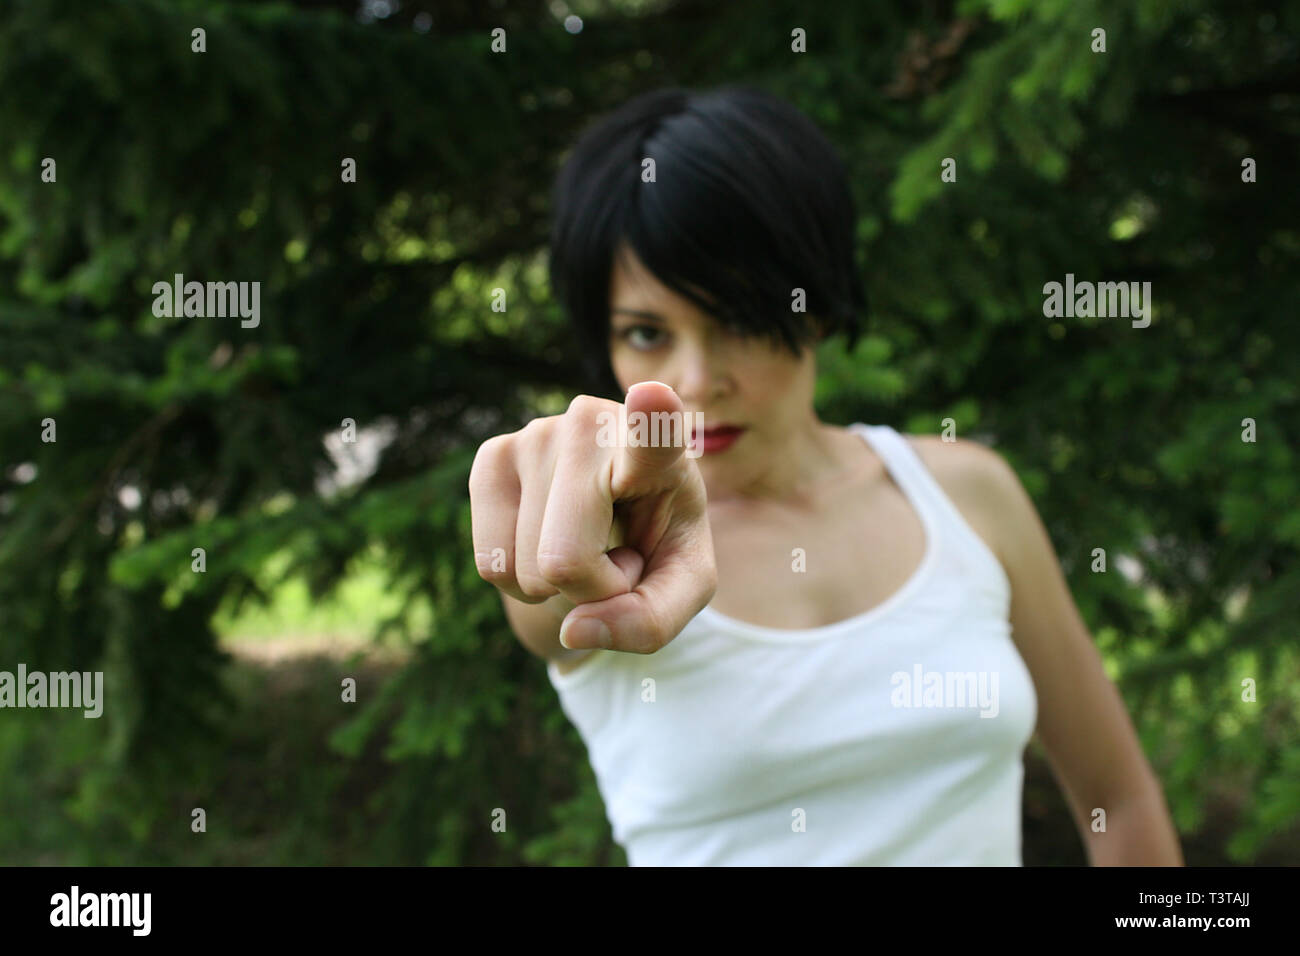 Beautiful dark haired lady with a white top making hand signals. She's pointing her finger at you. Stock Photo